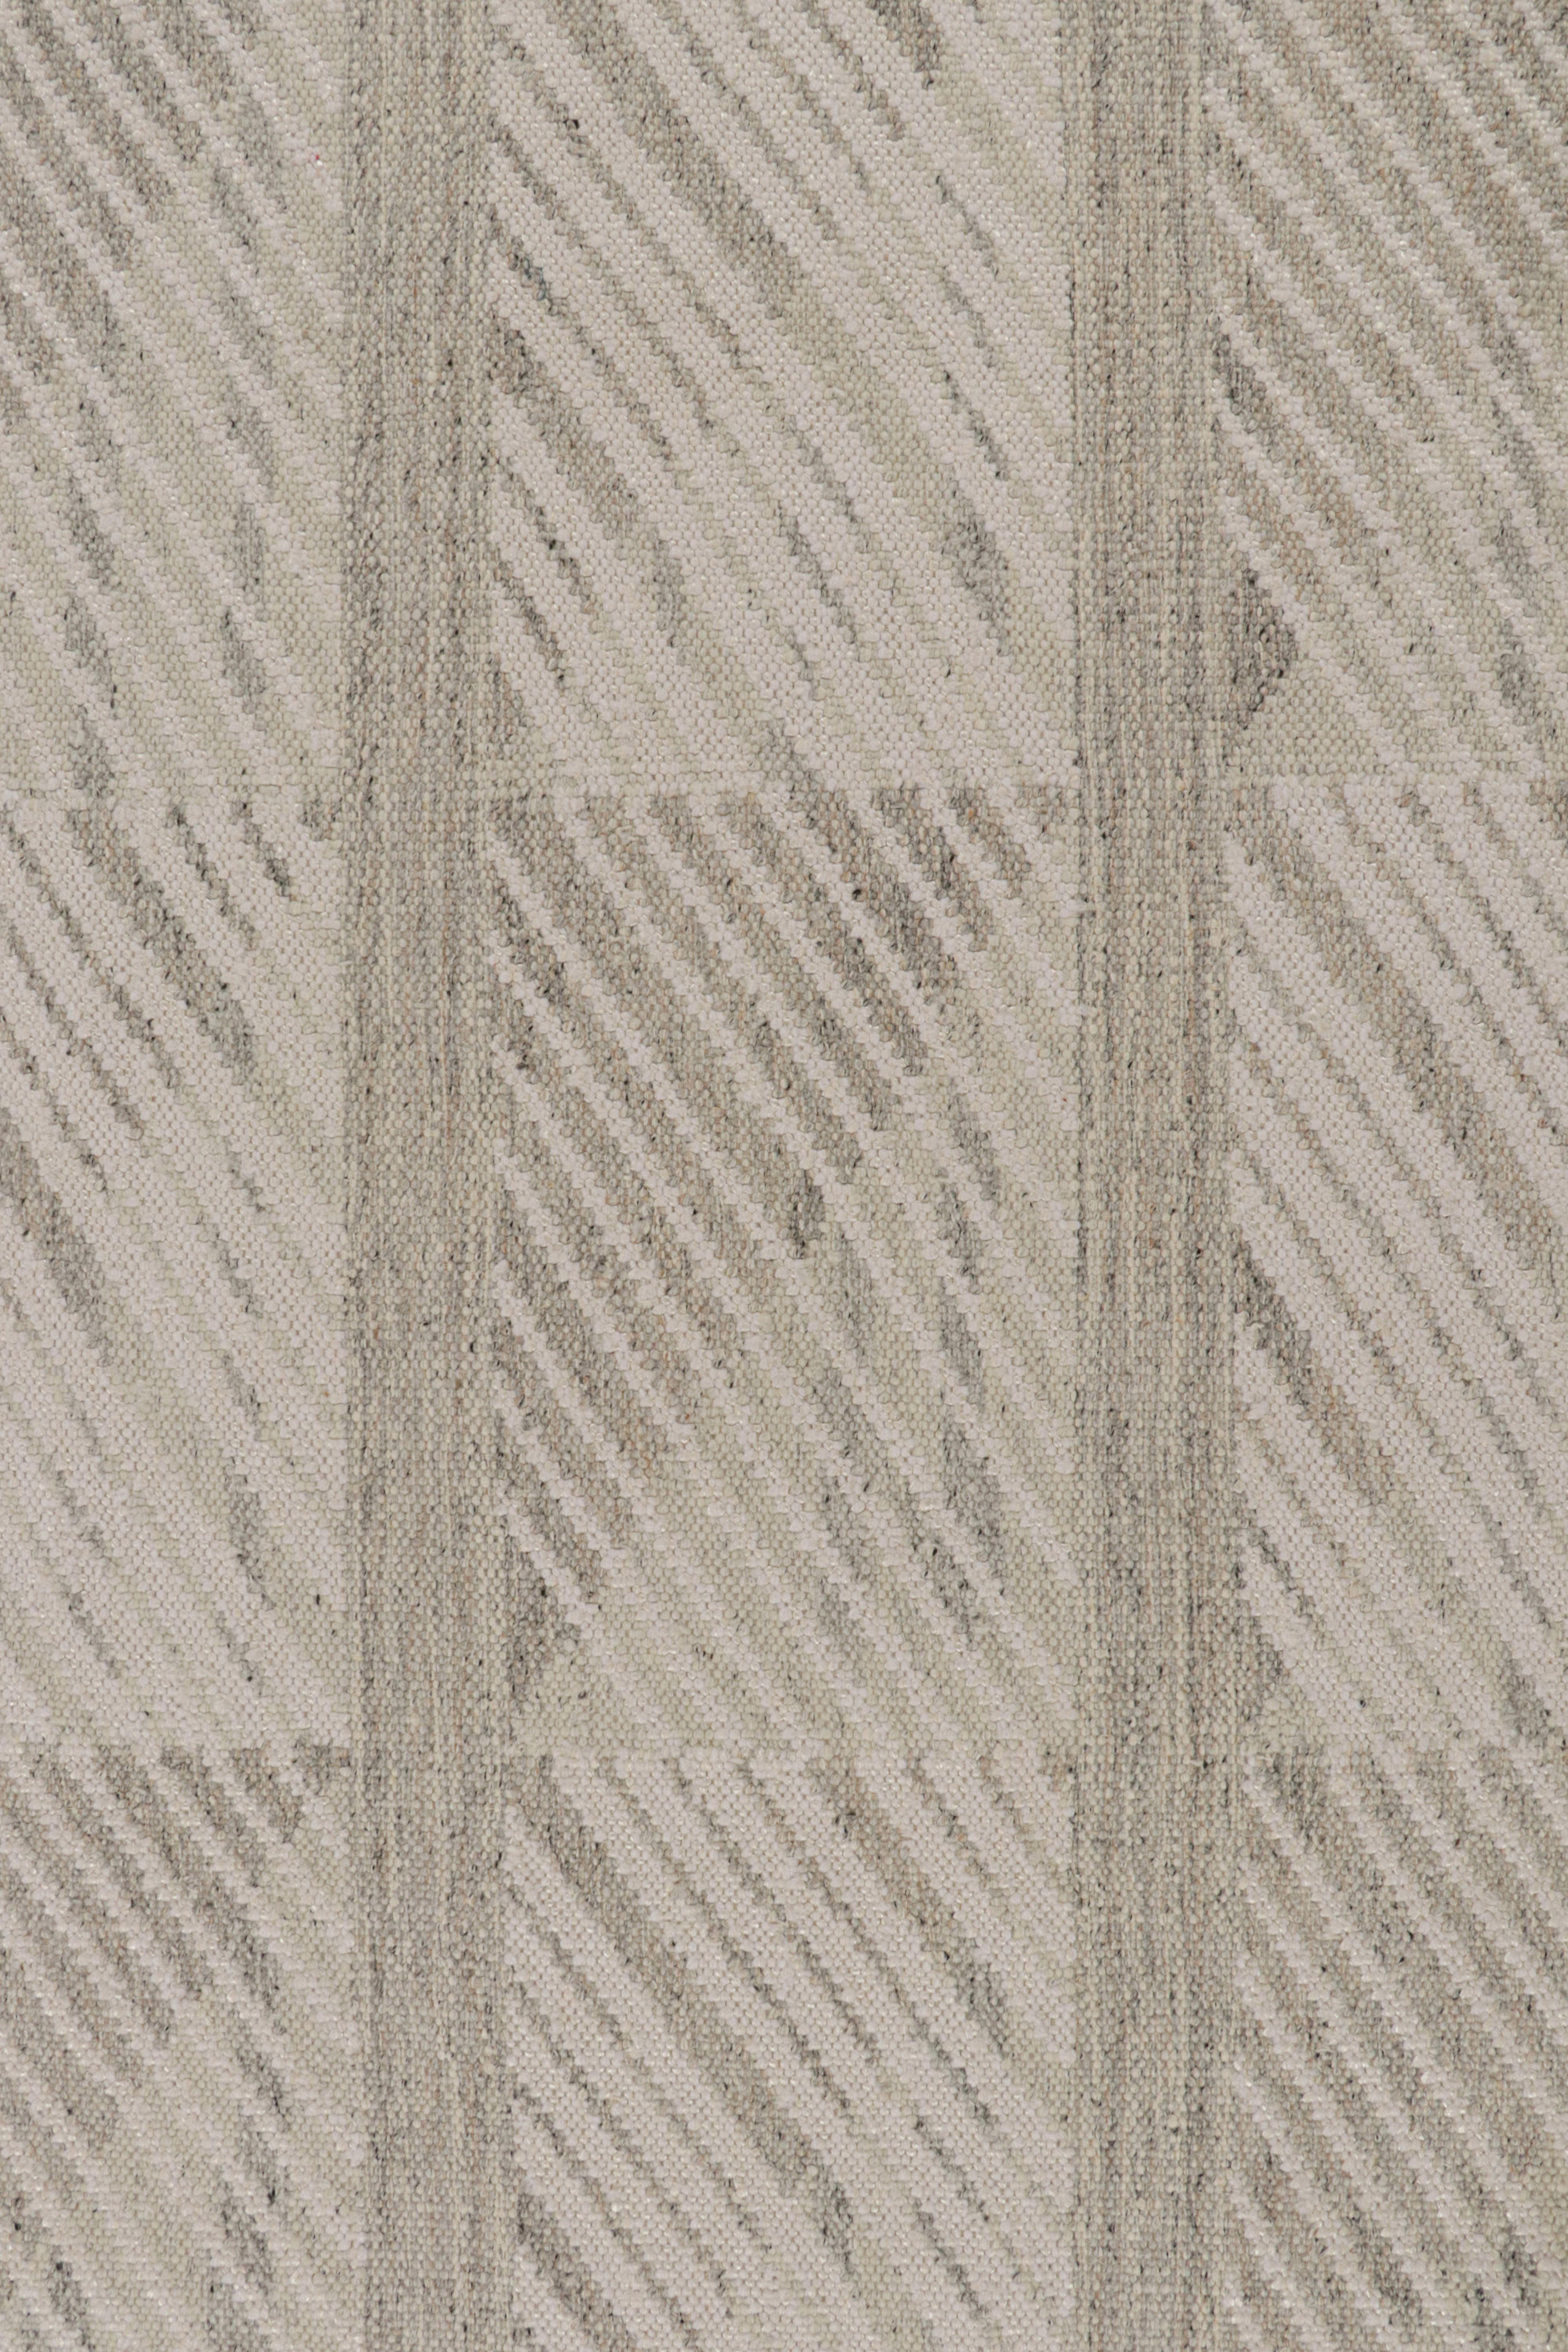 Rug & Kilim’s Scandinavian style Kilim rug in Gray & White Geometric Patterns In New Condition For Sale In Long Island City, NY